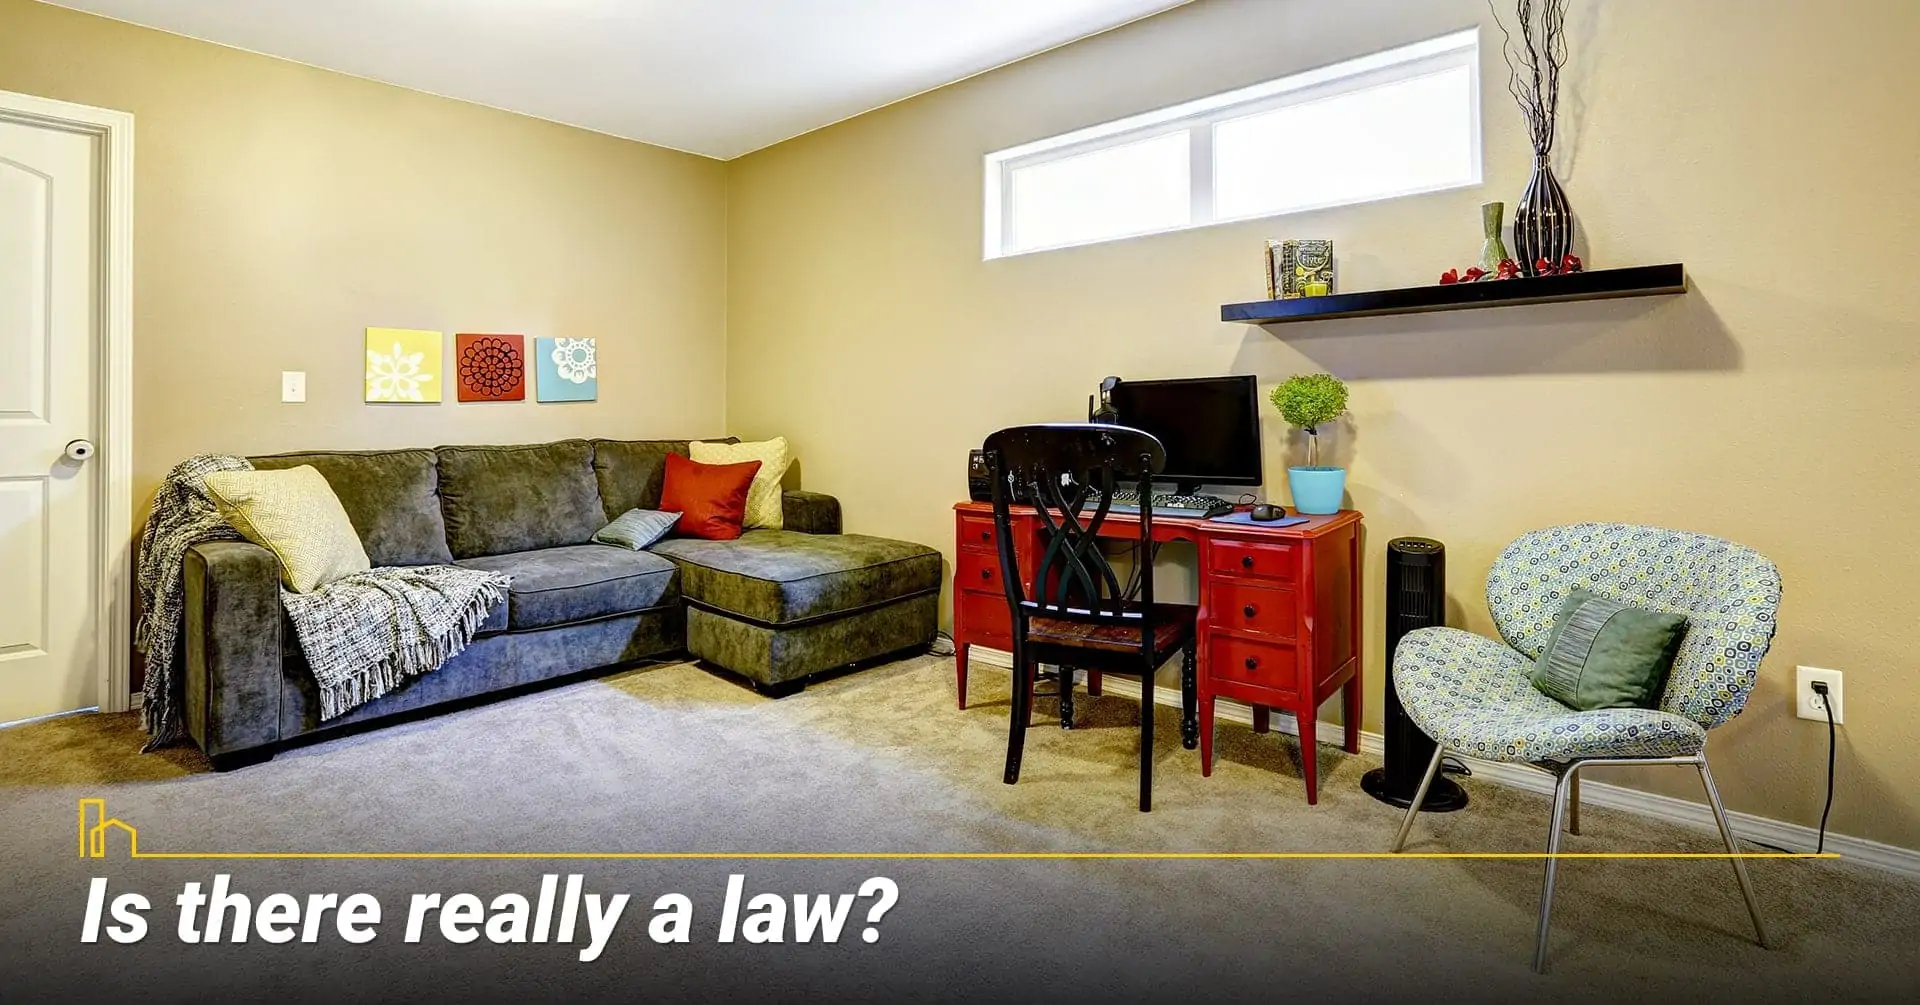 Is there really a law? having a bedroom in the basement